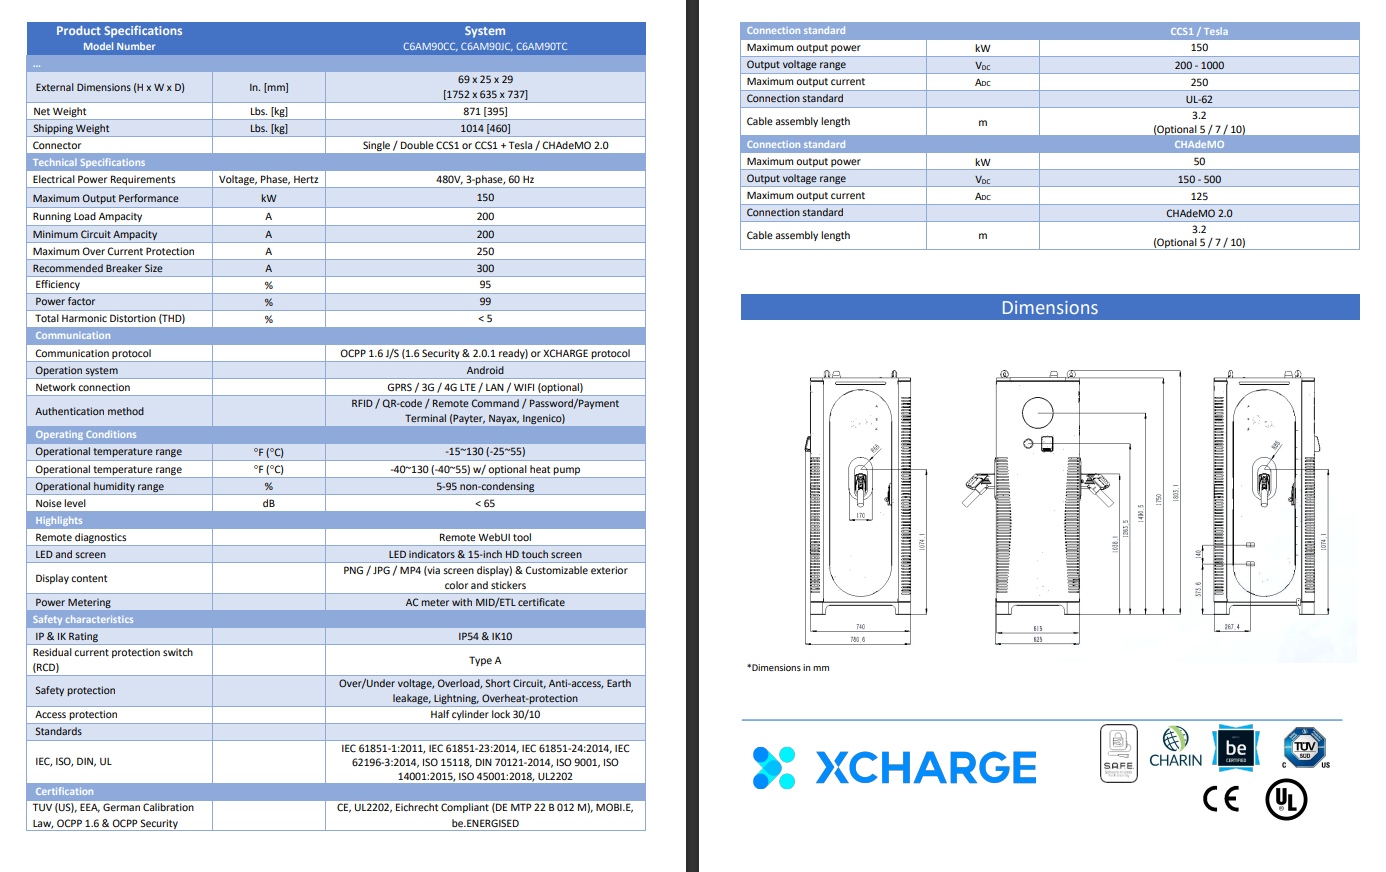 XCharge 6AM DCFC - 95kW, 125kW, or 150kW